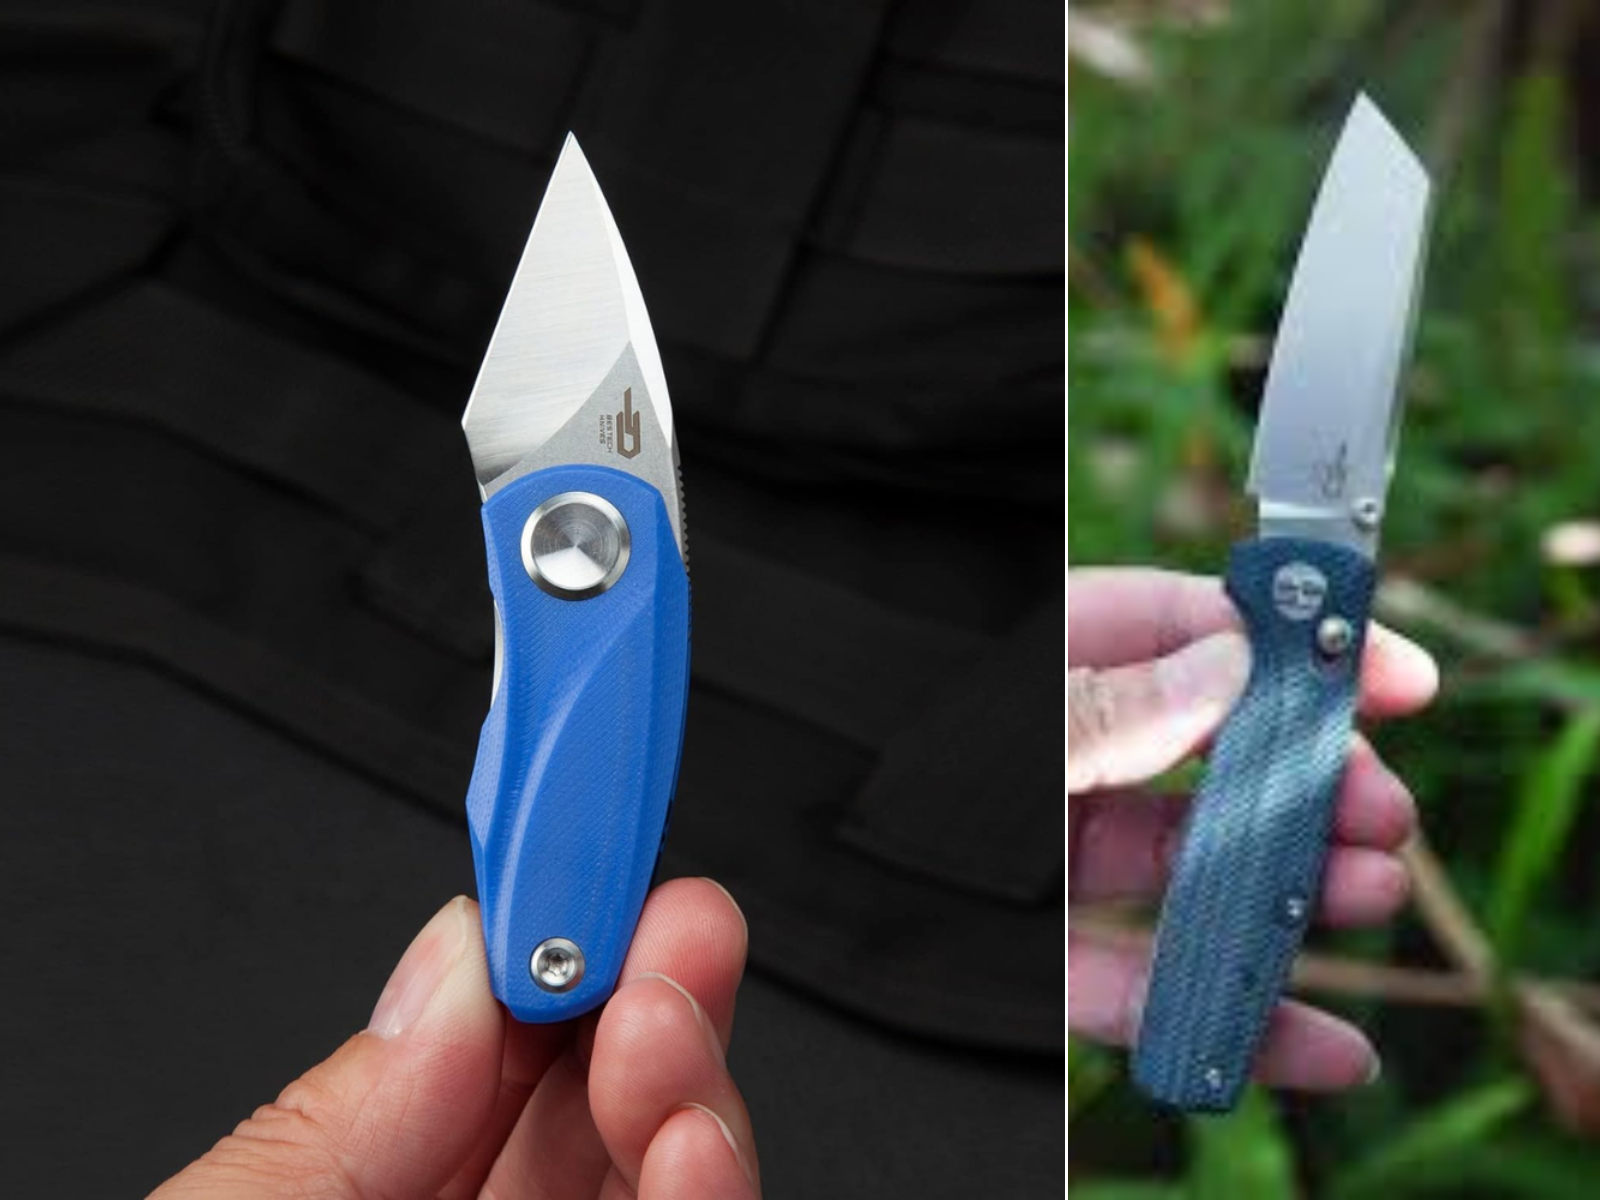 A man holding a blue mini knife, and another holding a cleaver knife with Bestech style.